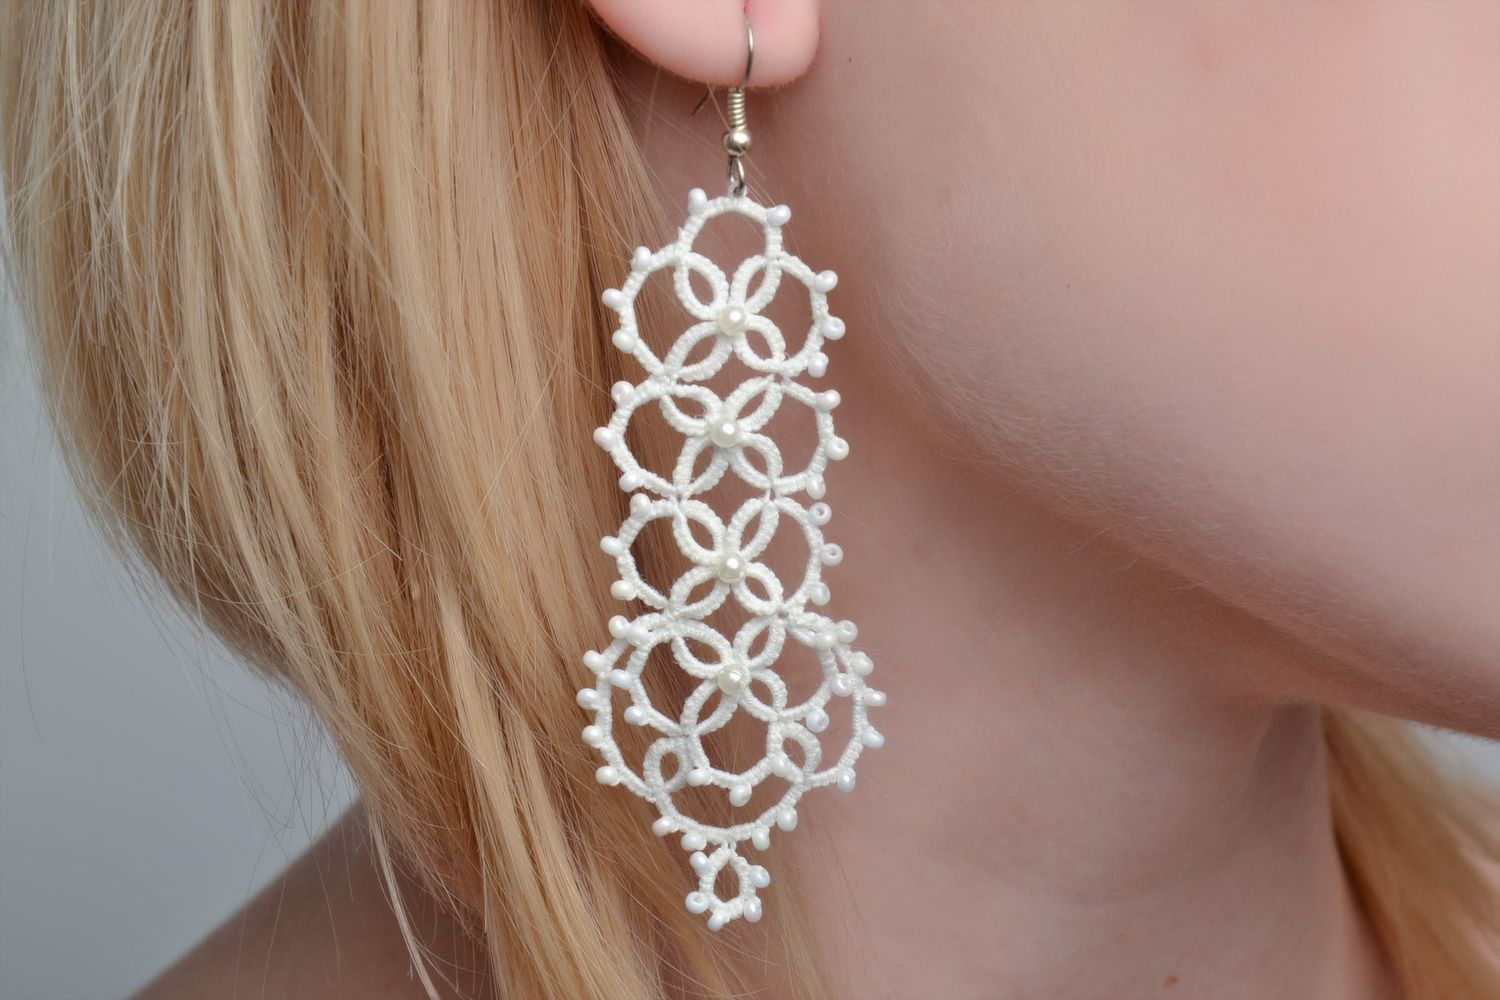 Woven earrings with beads made using tatting technique photo 5